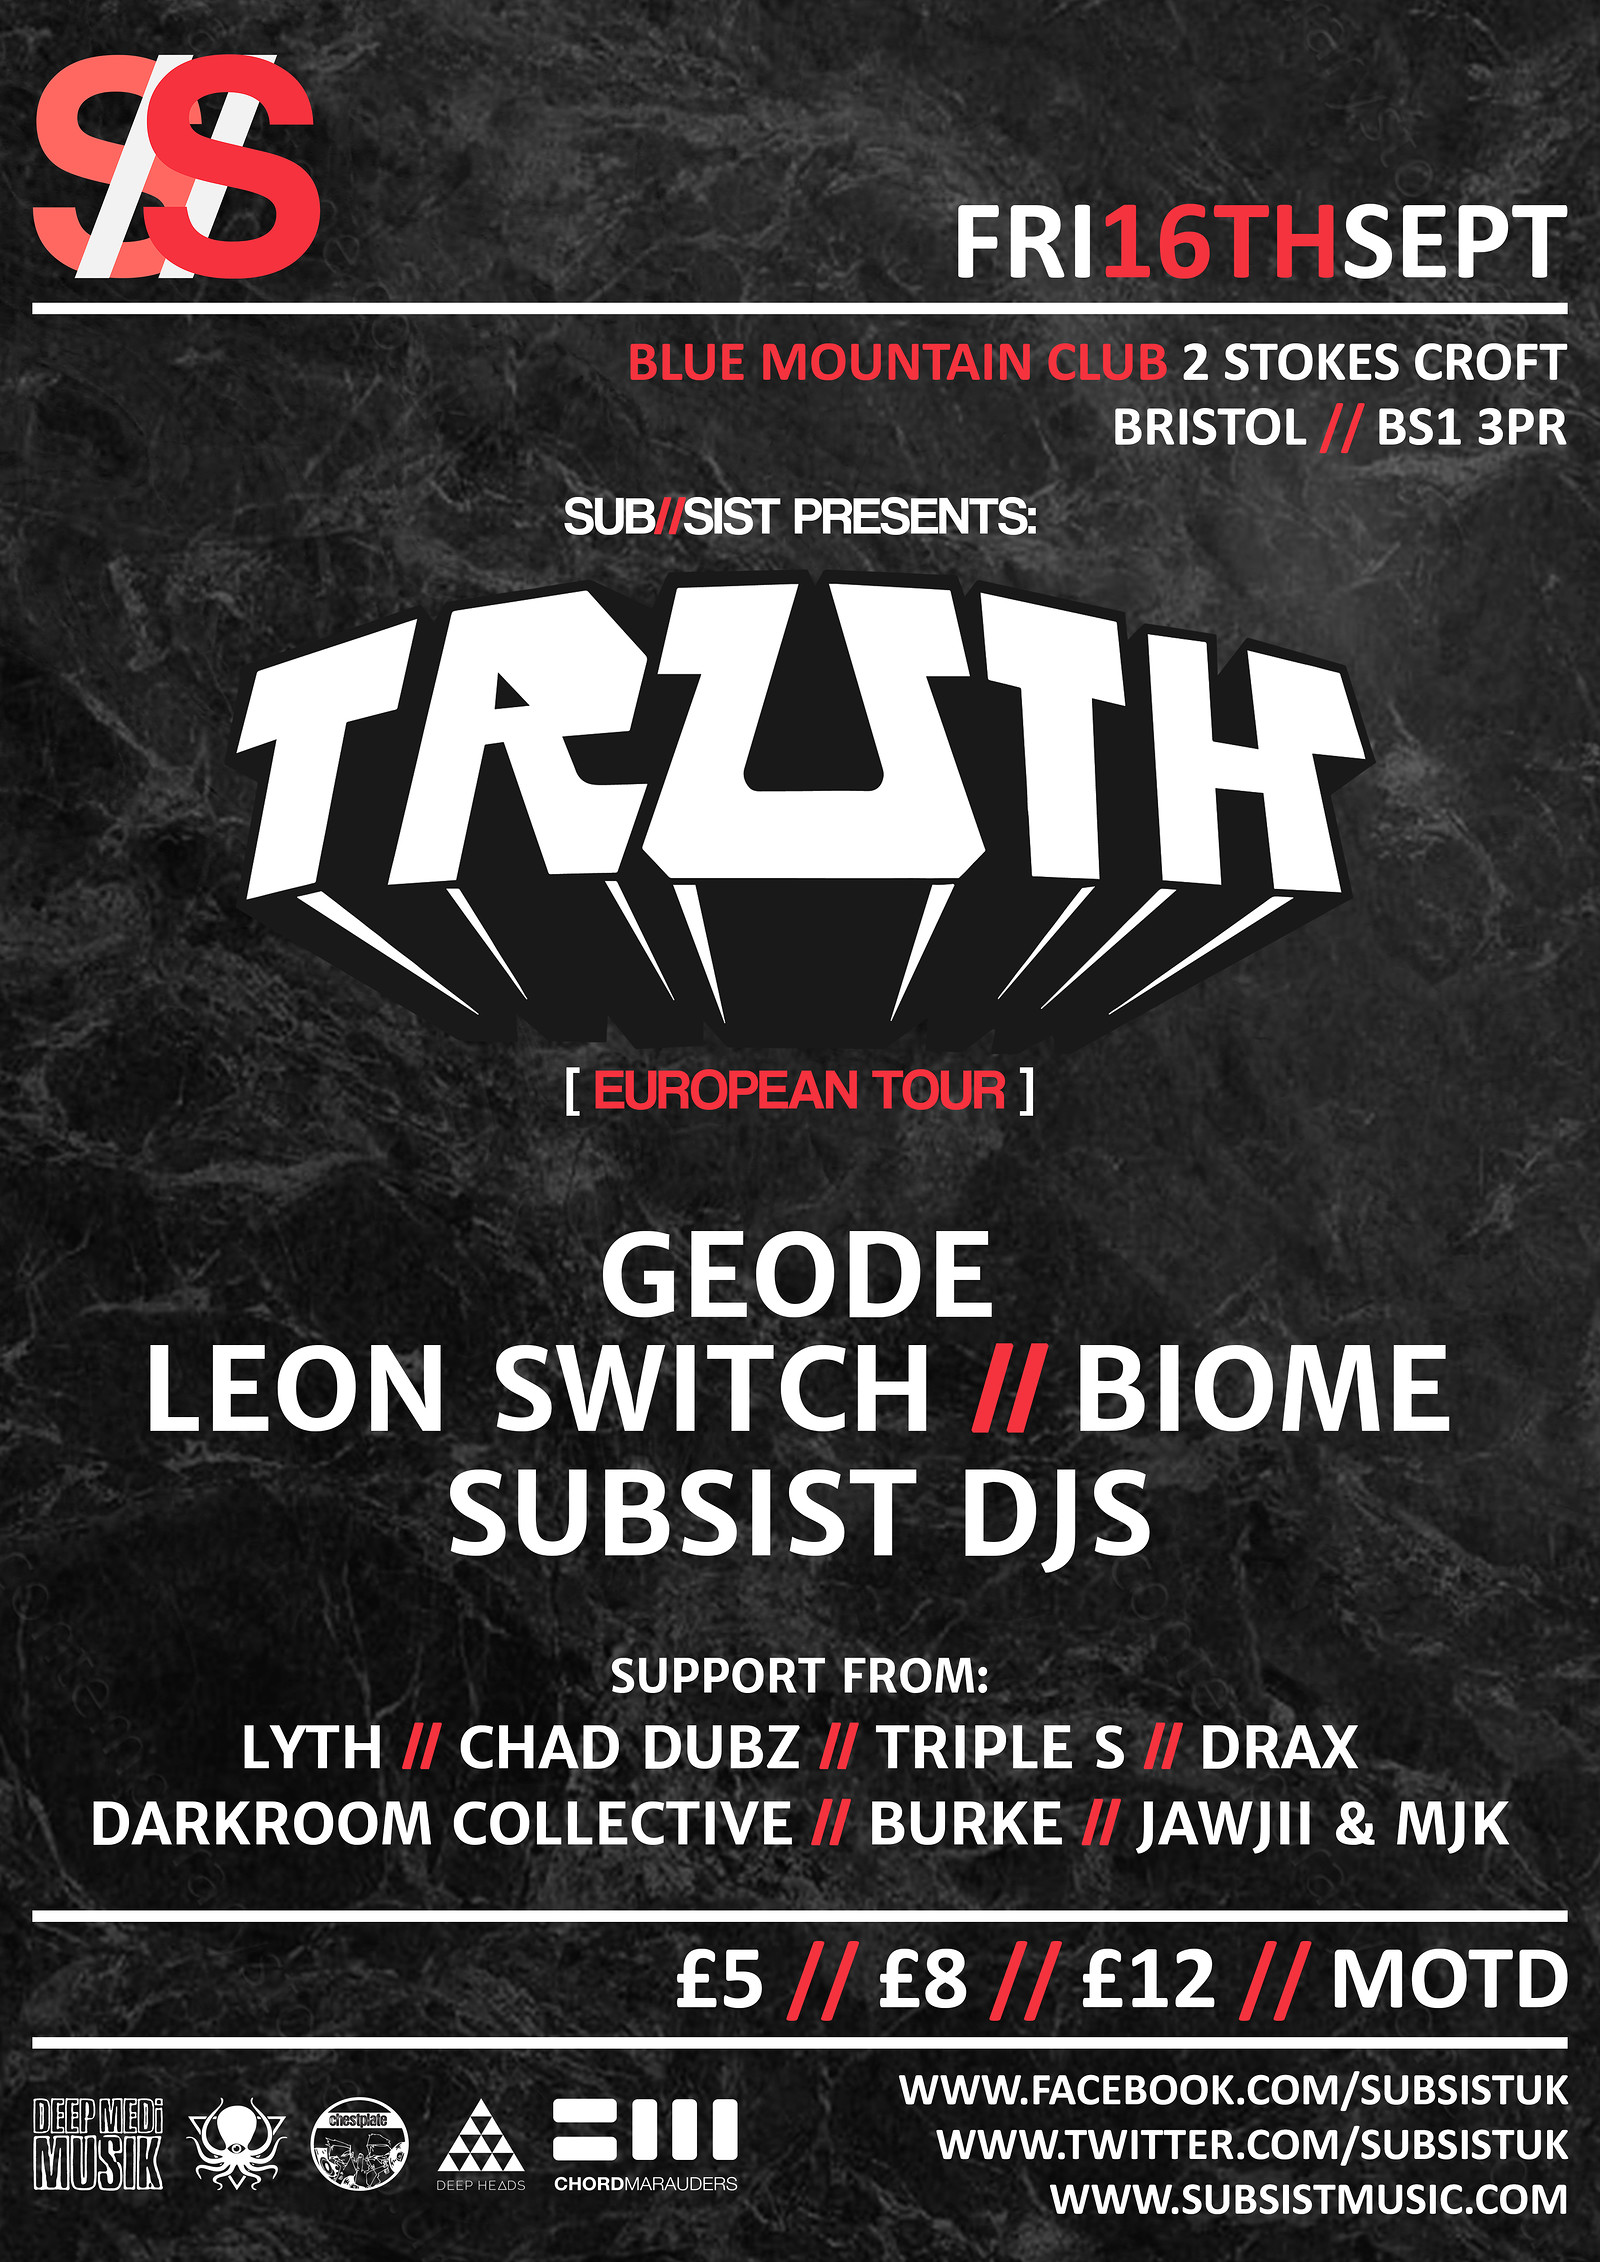 Subsist Presents: Truth at Blue Mountain